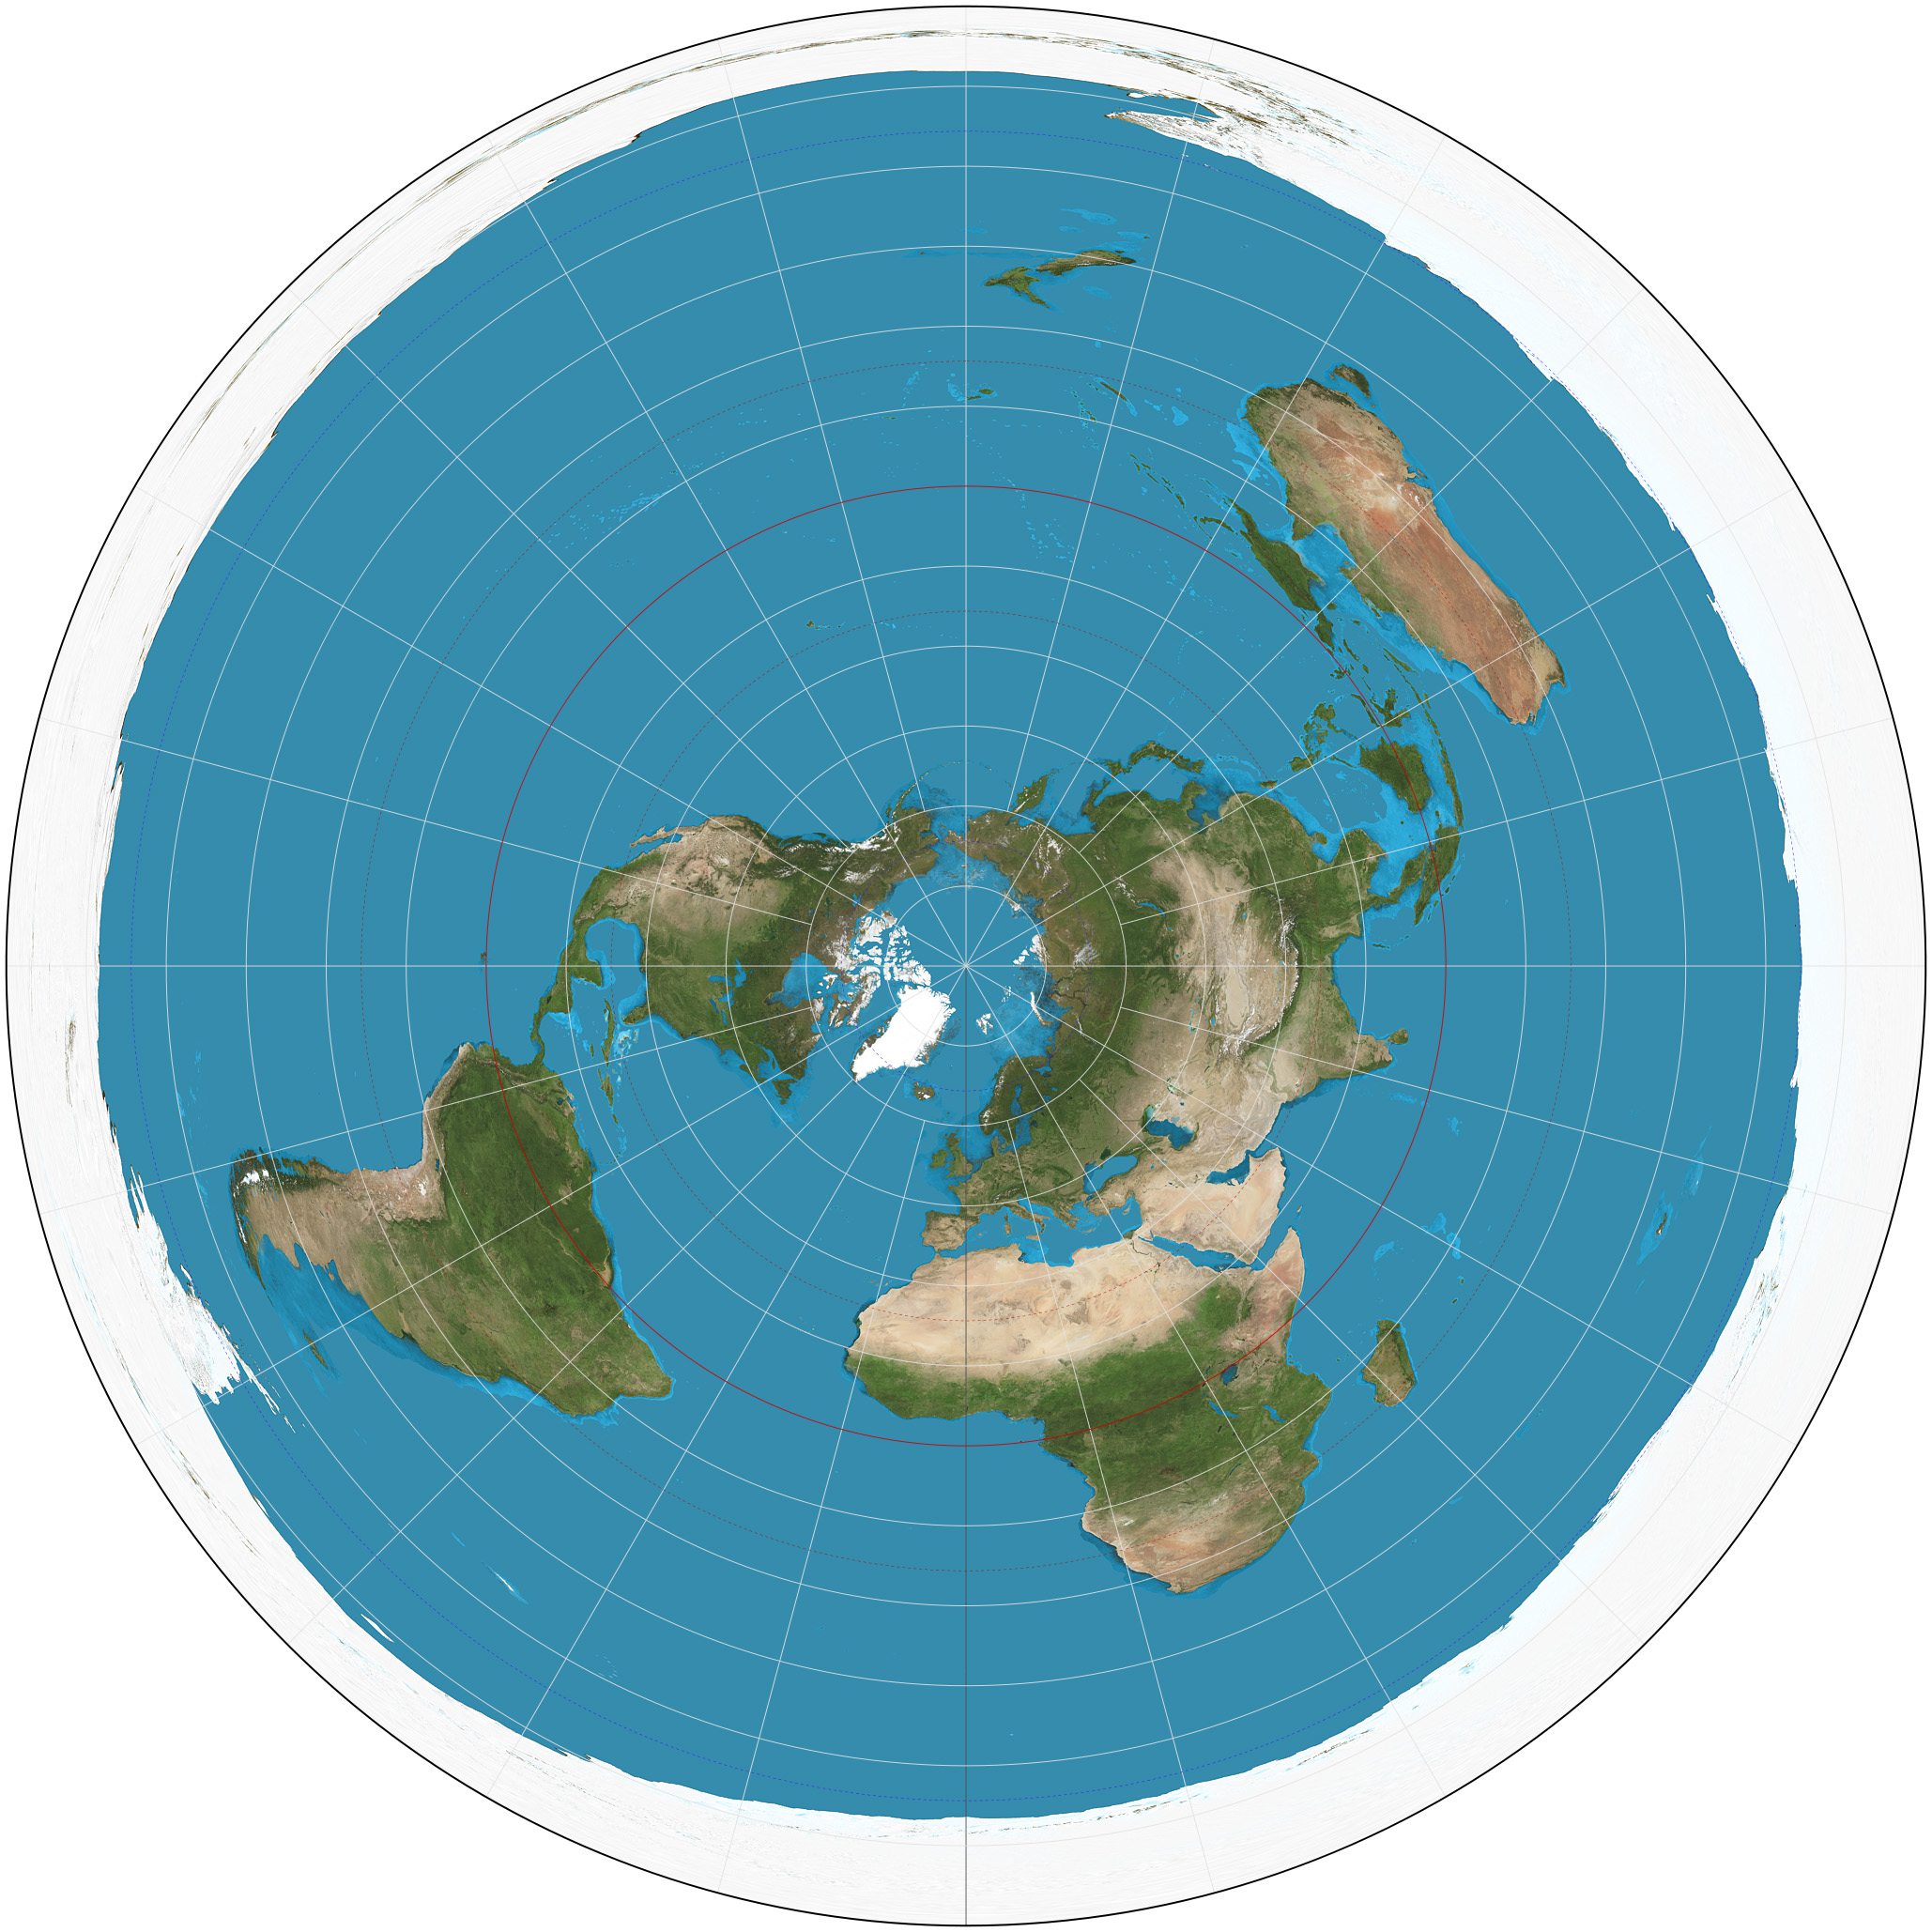 <p>a type projection which views the earth from the north or south pole</p><ul><li><p>Accuracies:</p><ul><li><p>Direction</p></li></ul></li><li><p>Inaccuracies:</p><ul><li><p>Shape</p></li><li><p>Distance</p></li><li><p>Relative Size</p></li></ul></li></ul>